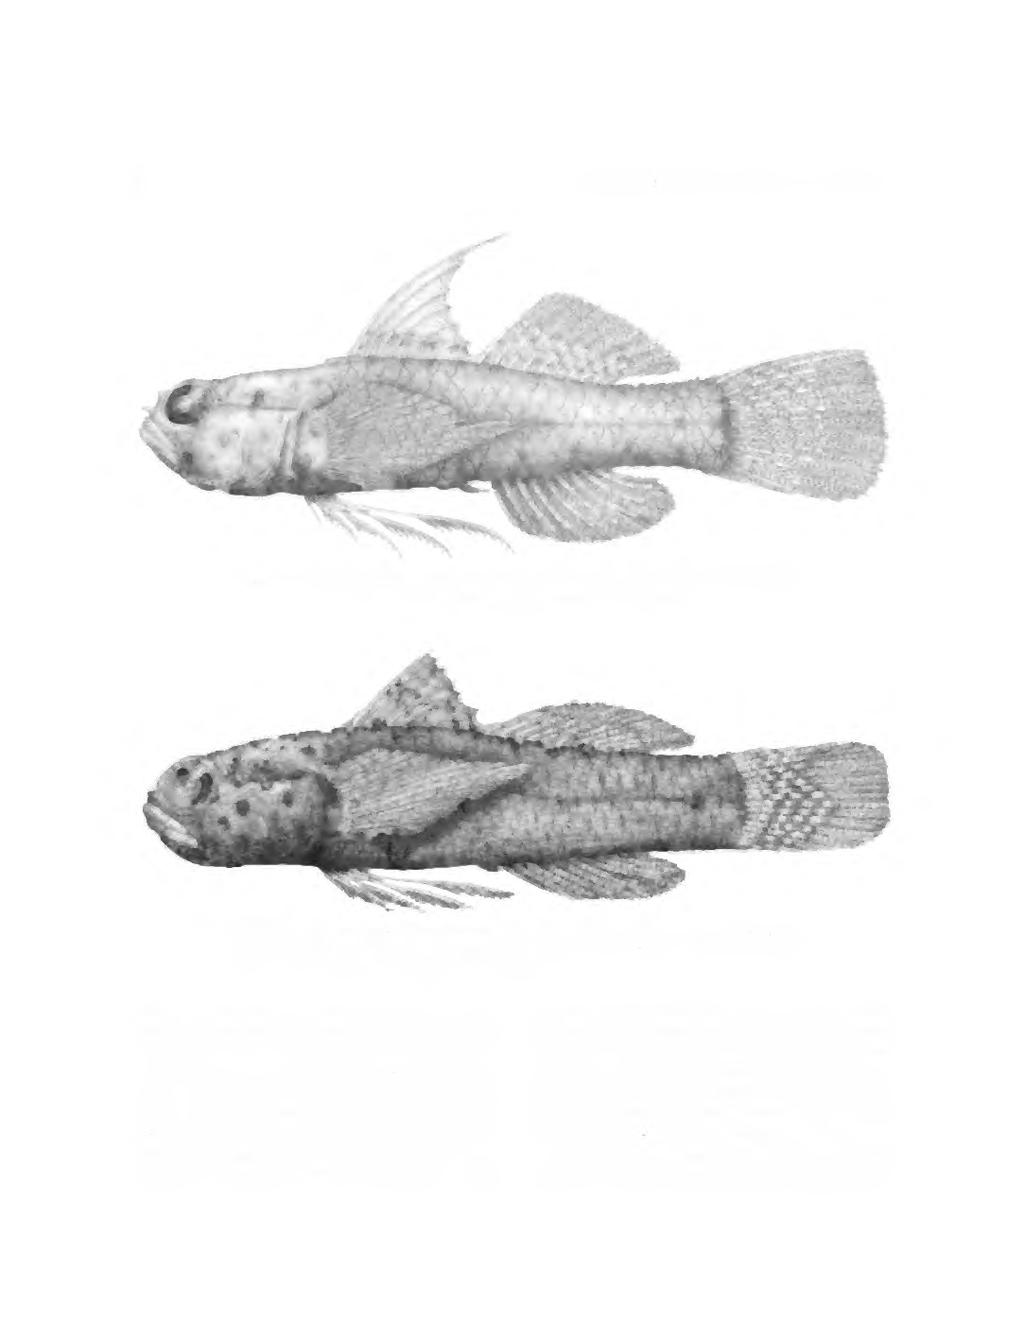 88 SMITHSONIAN CONTRIBUTIONS TO ZOOLOGY FIGURE 47. Eviota queenslandica with basal dusky band through spinous dorsal fin, CAS 4754, male, 7.0 mm SL, Palau Islands. (Drawn by Paul Mazer.) FIGURE 48.